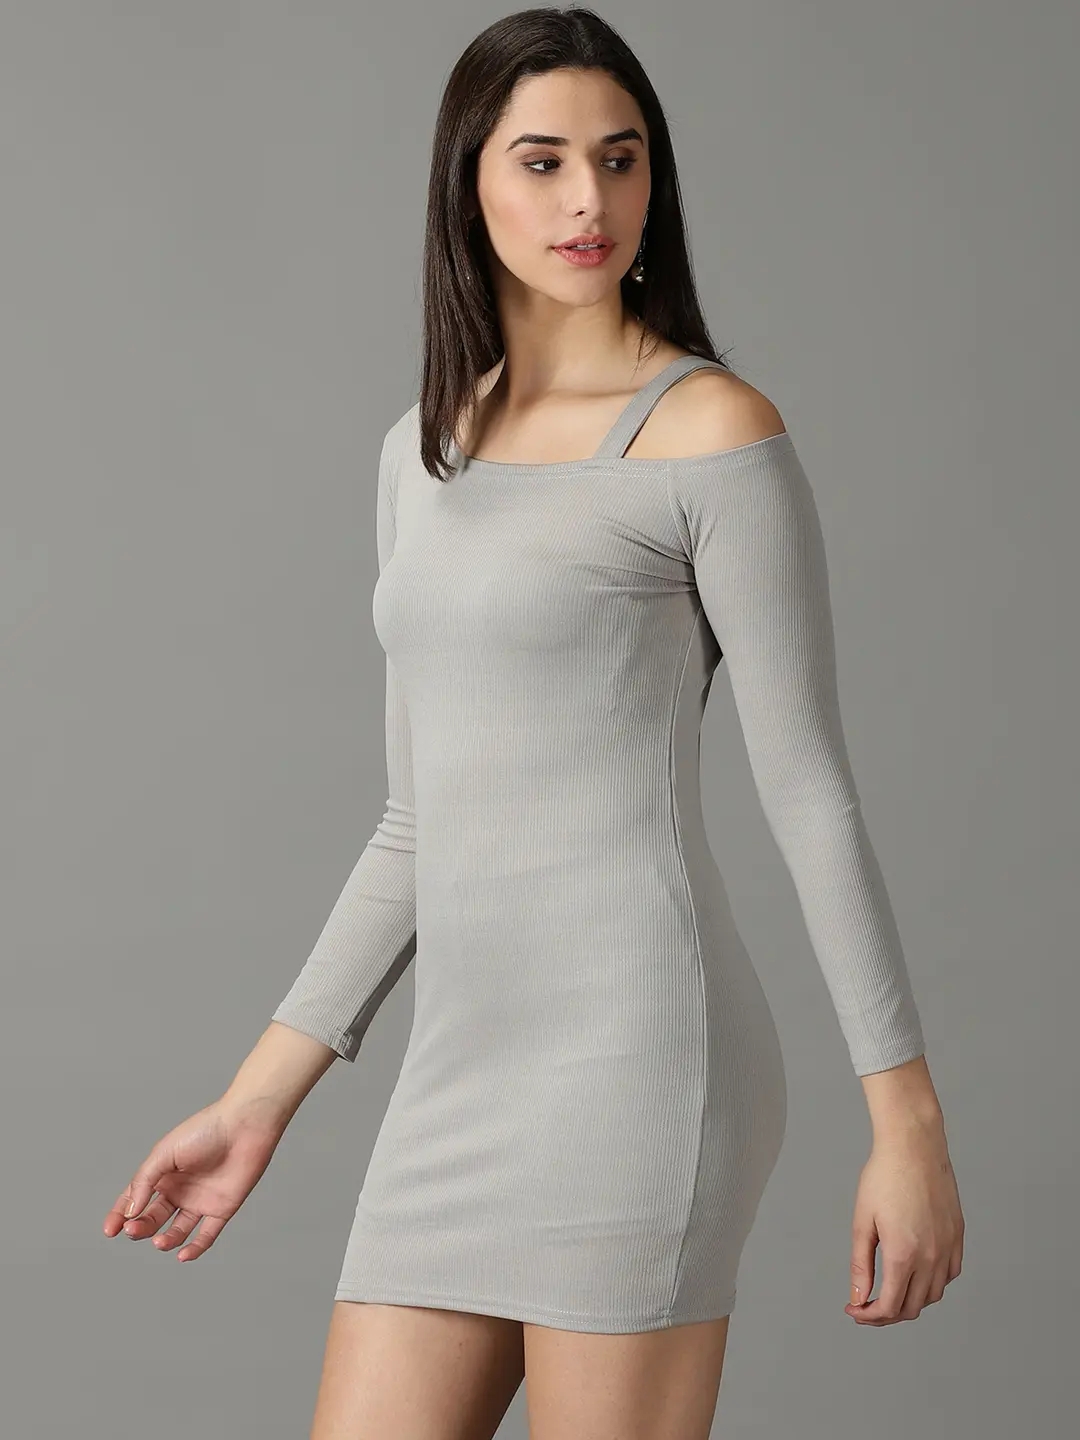 Showoff | SHOWOFF Women Grey Solid Asymmetric Neck Full Sleeves Above Knee Bodycon Dress 2